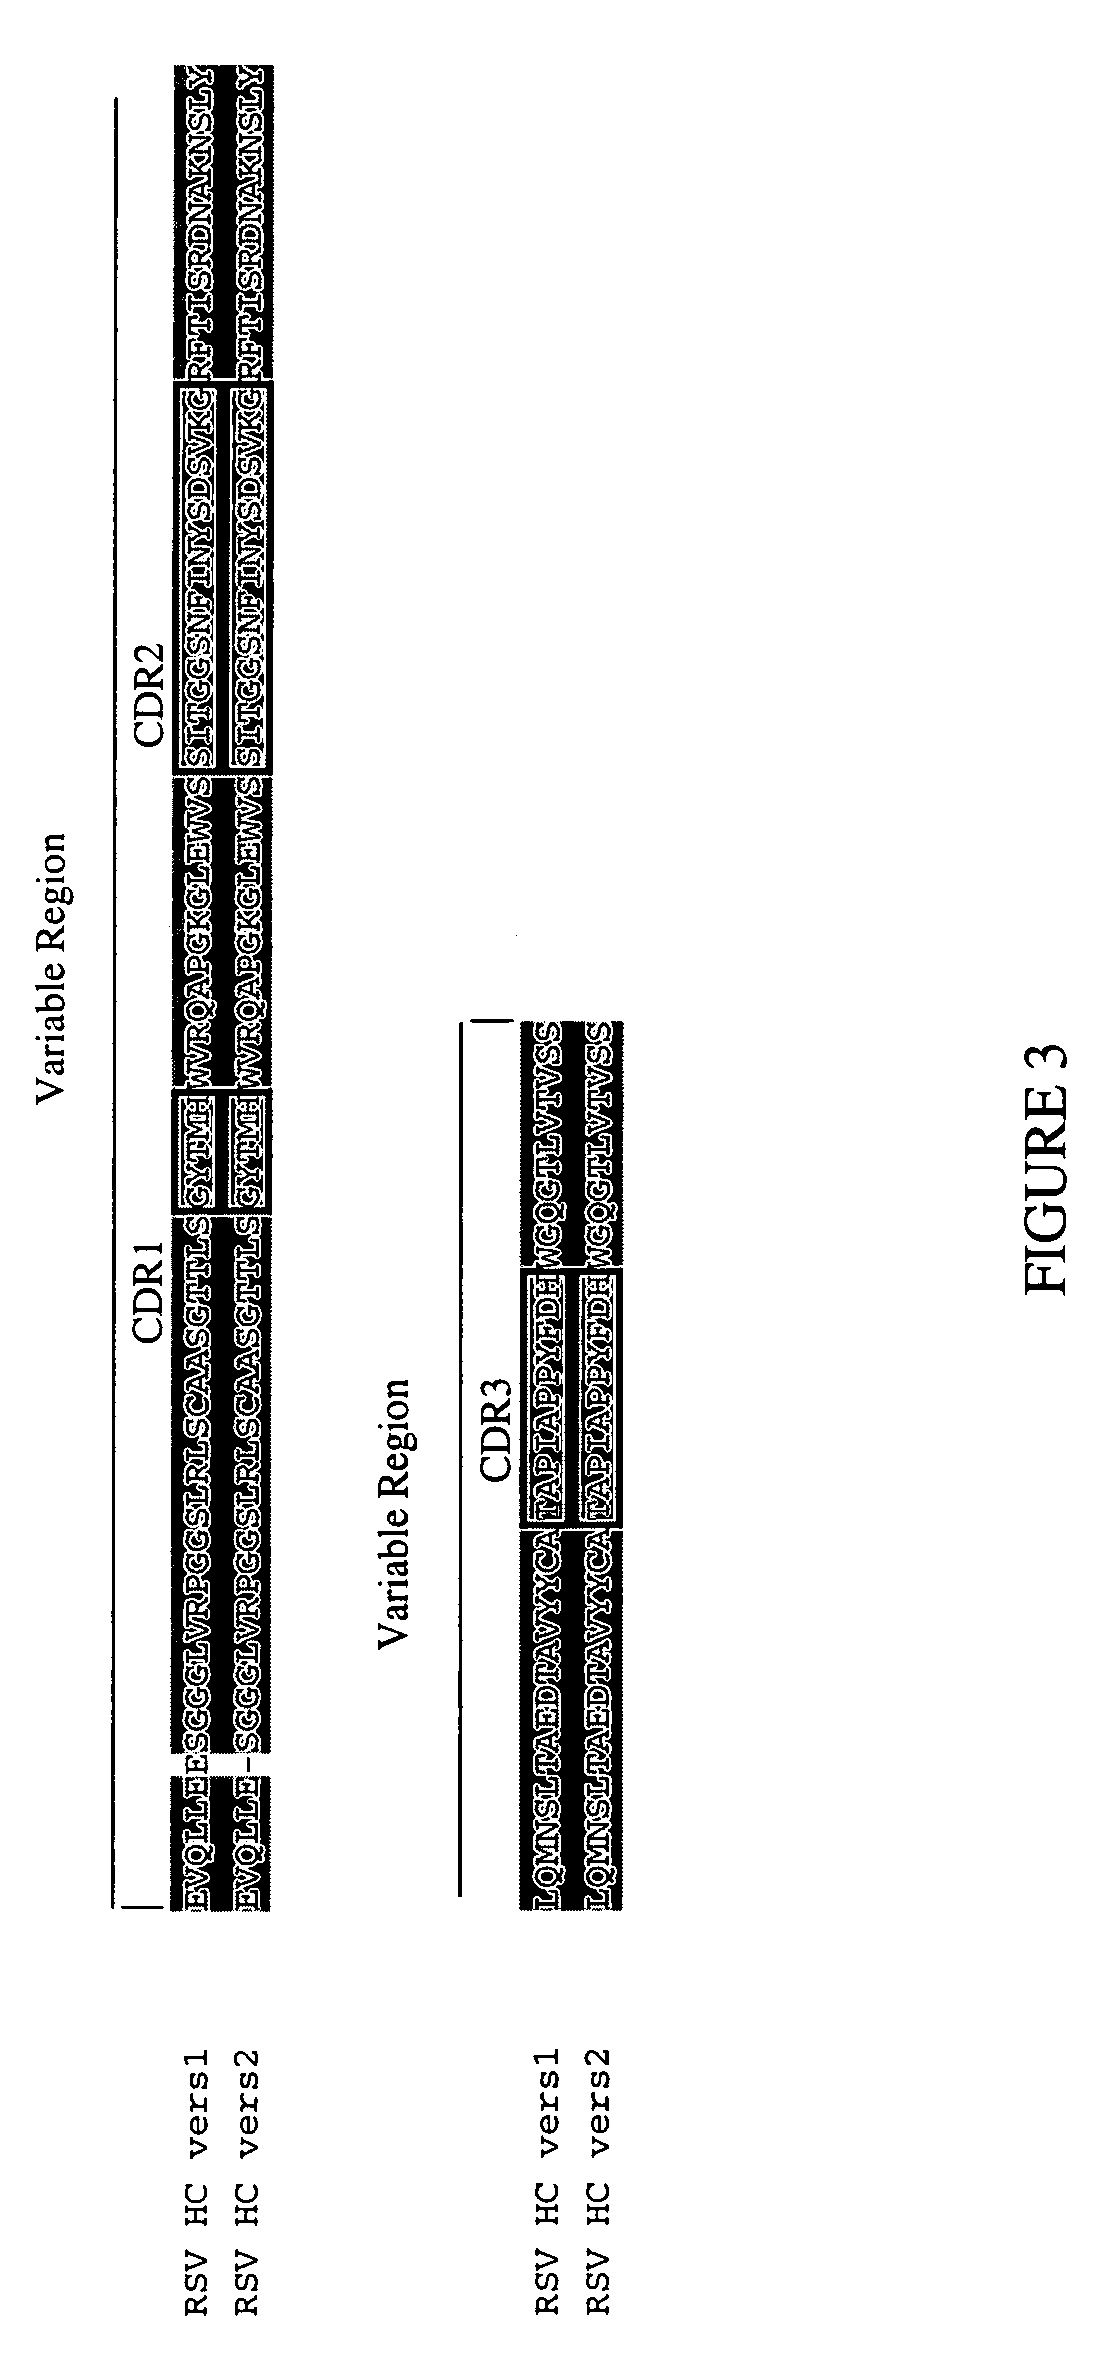 RSV proteins, antibodies, compositions, methods and uses